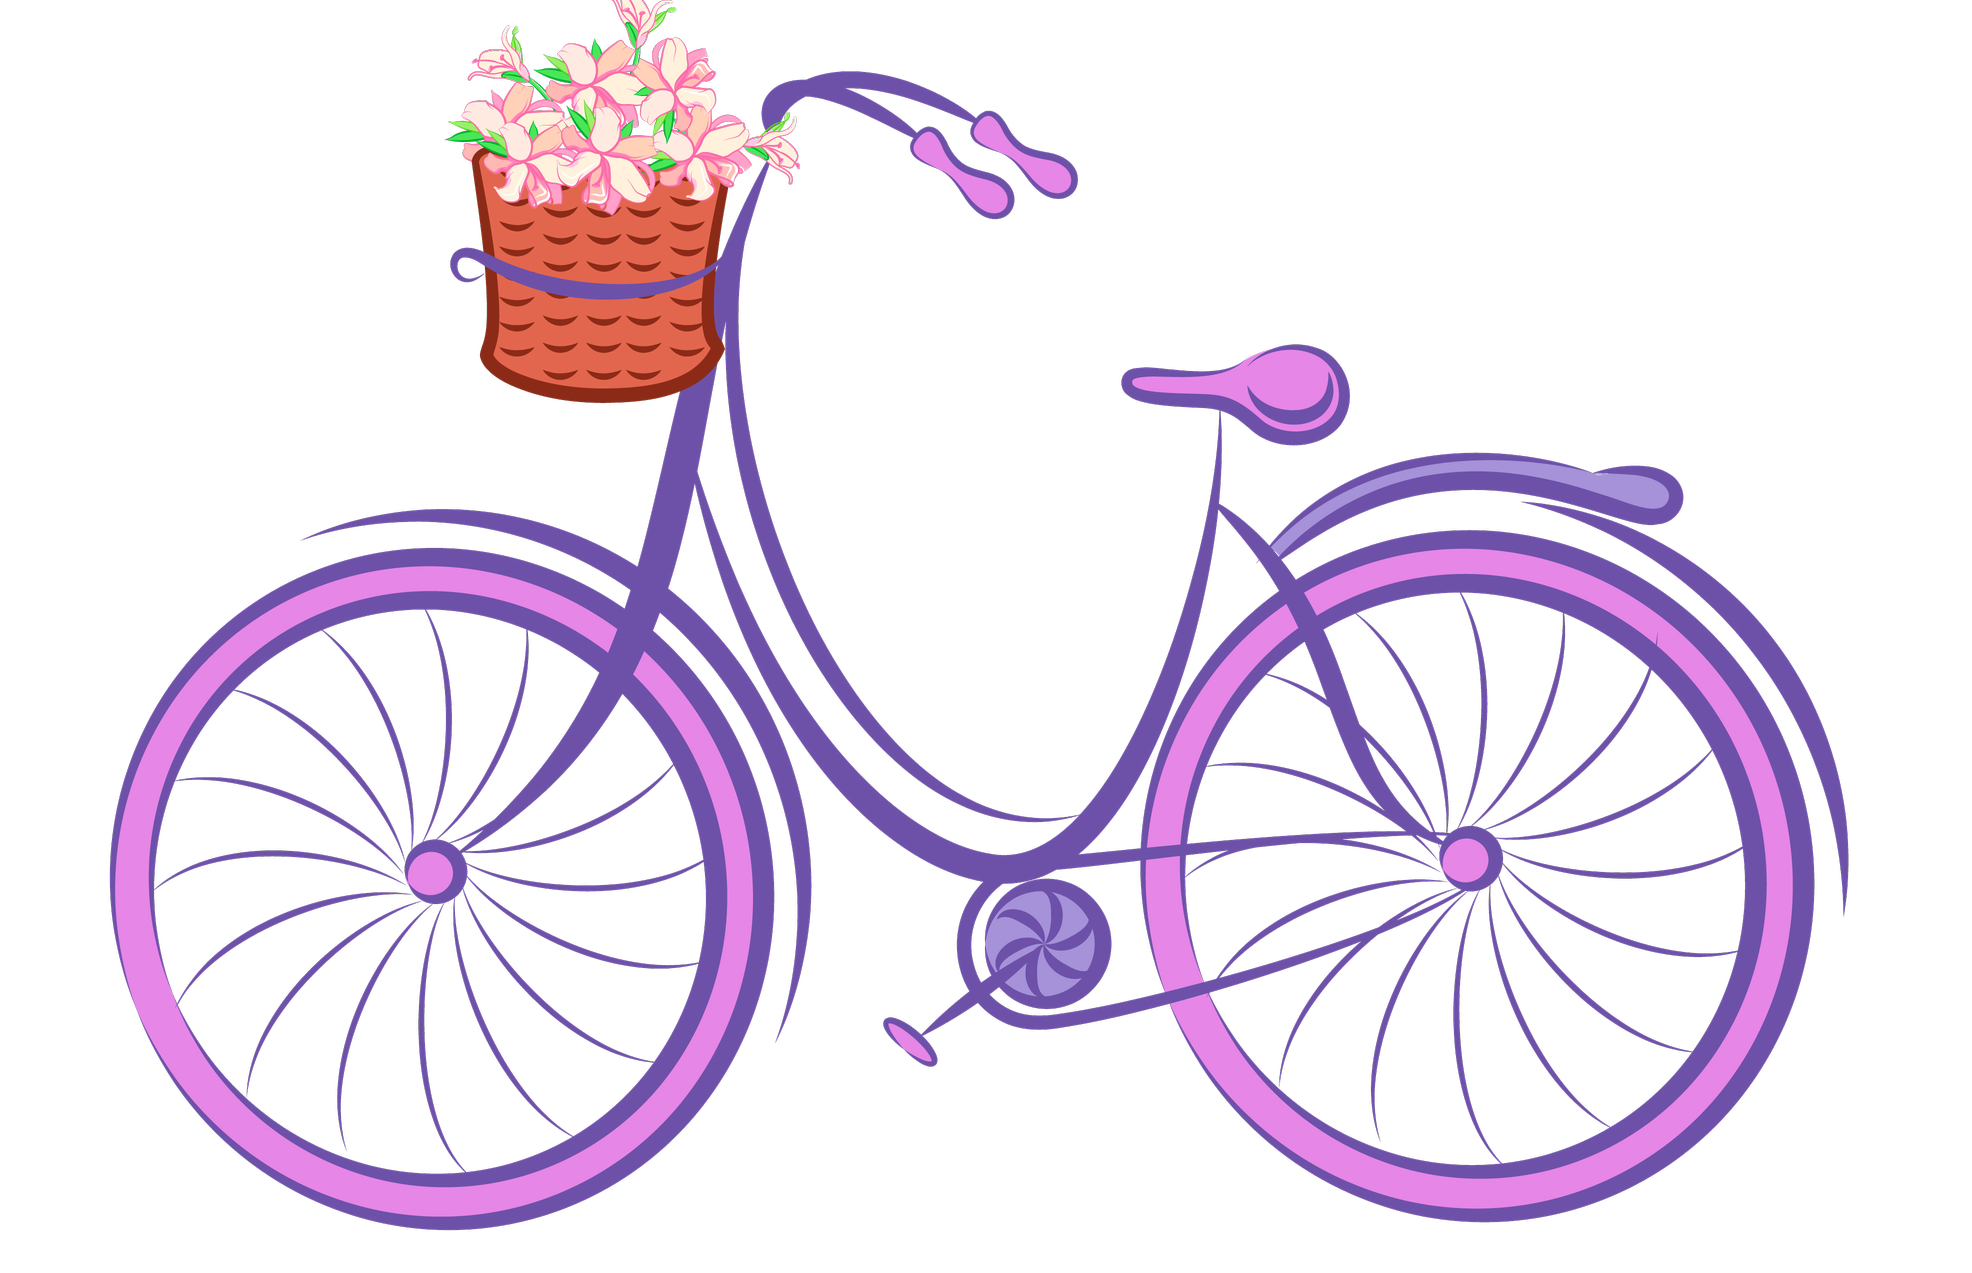 Diy bicycle tuneup parallel. Cycle clipart purple bike